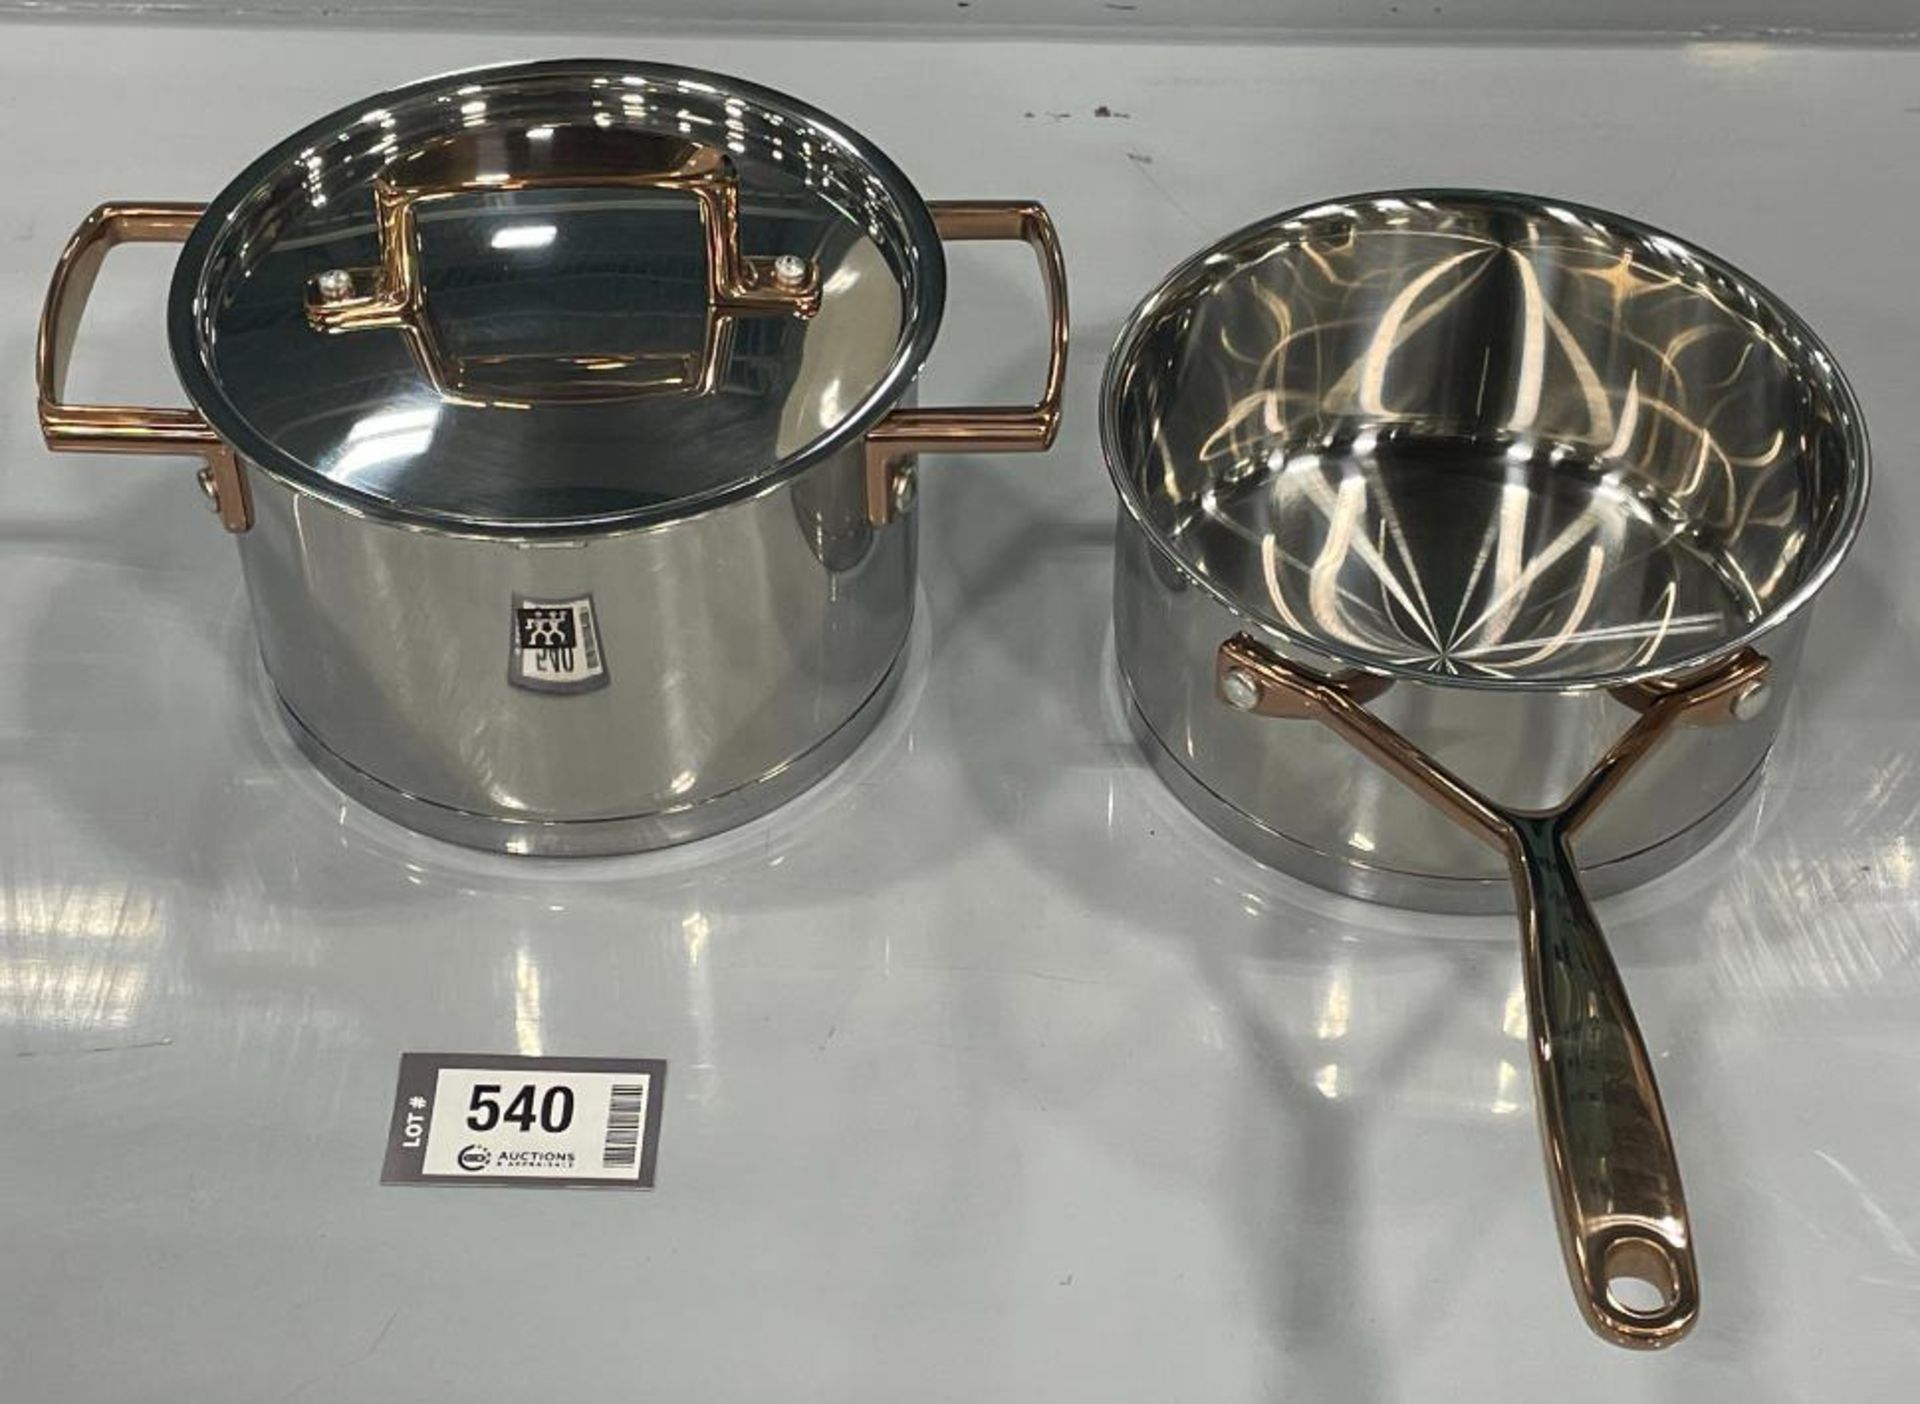 NEW ZWILLING 18/10 STAINLESS STEEL INDUCTION CAPABLE 2L STOCK POT & 1.5L SAUCE PAN - Image 2 of 12